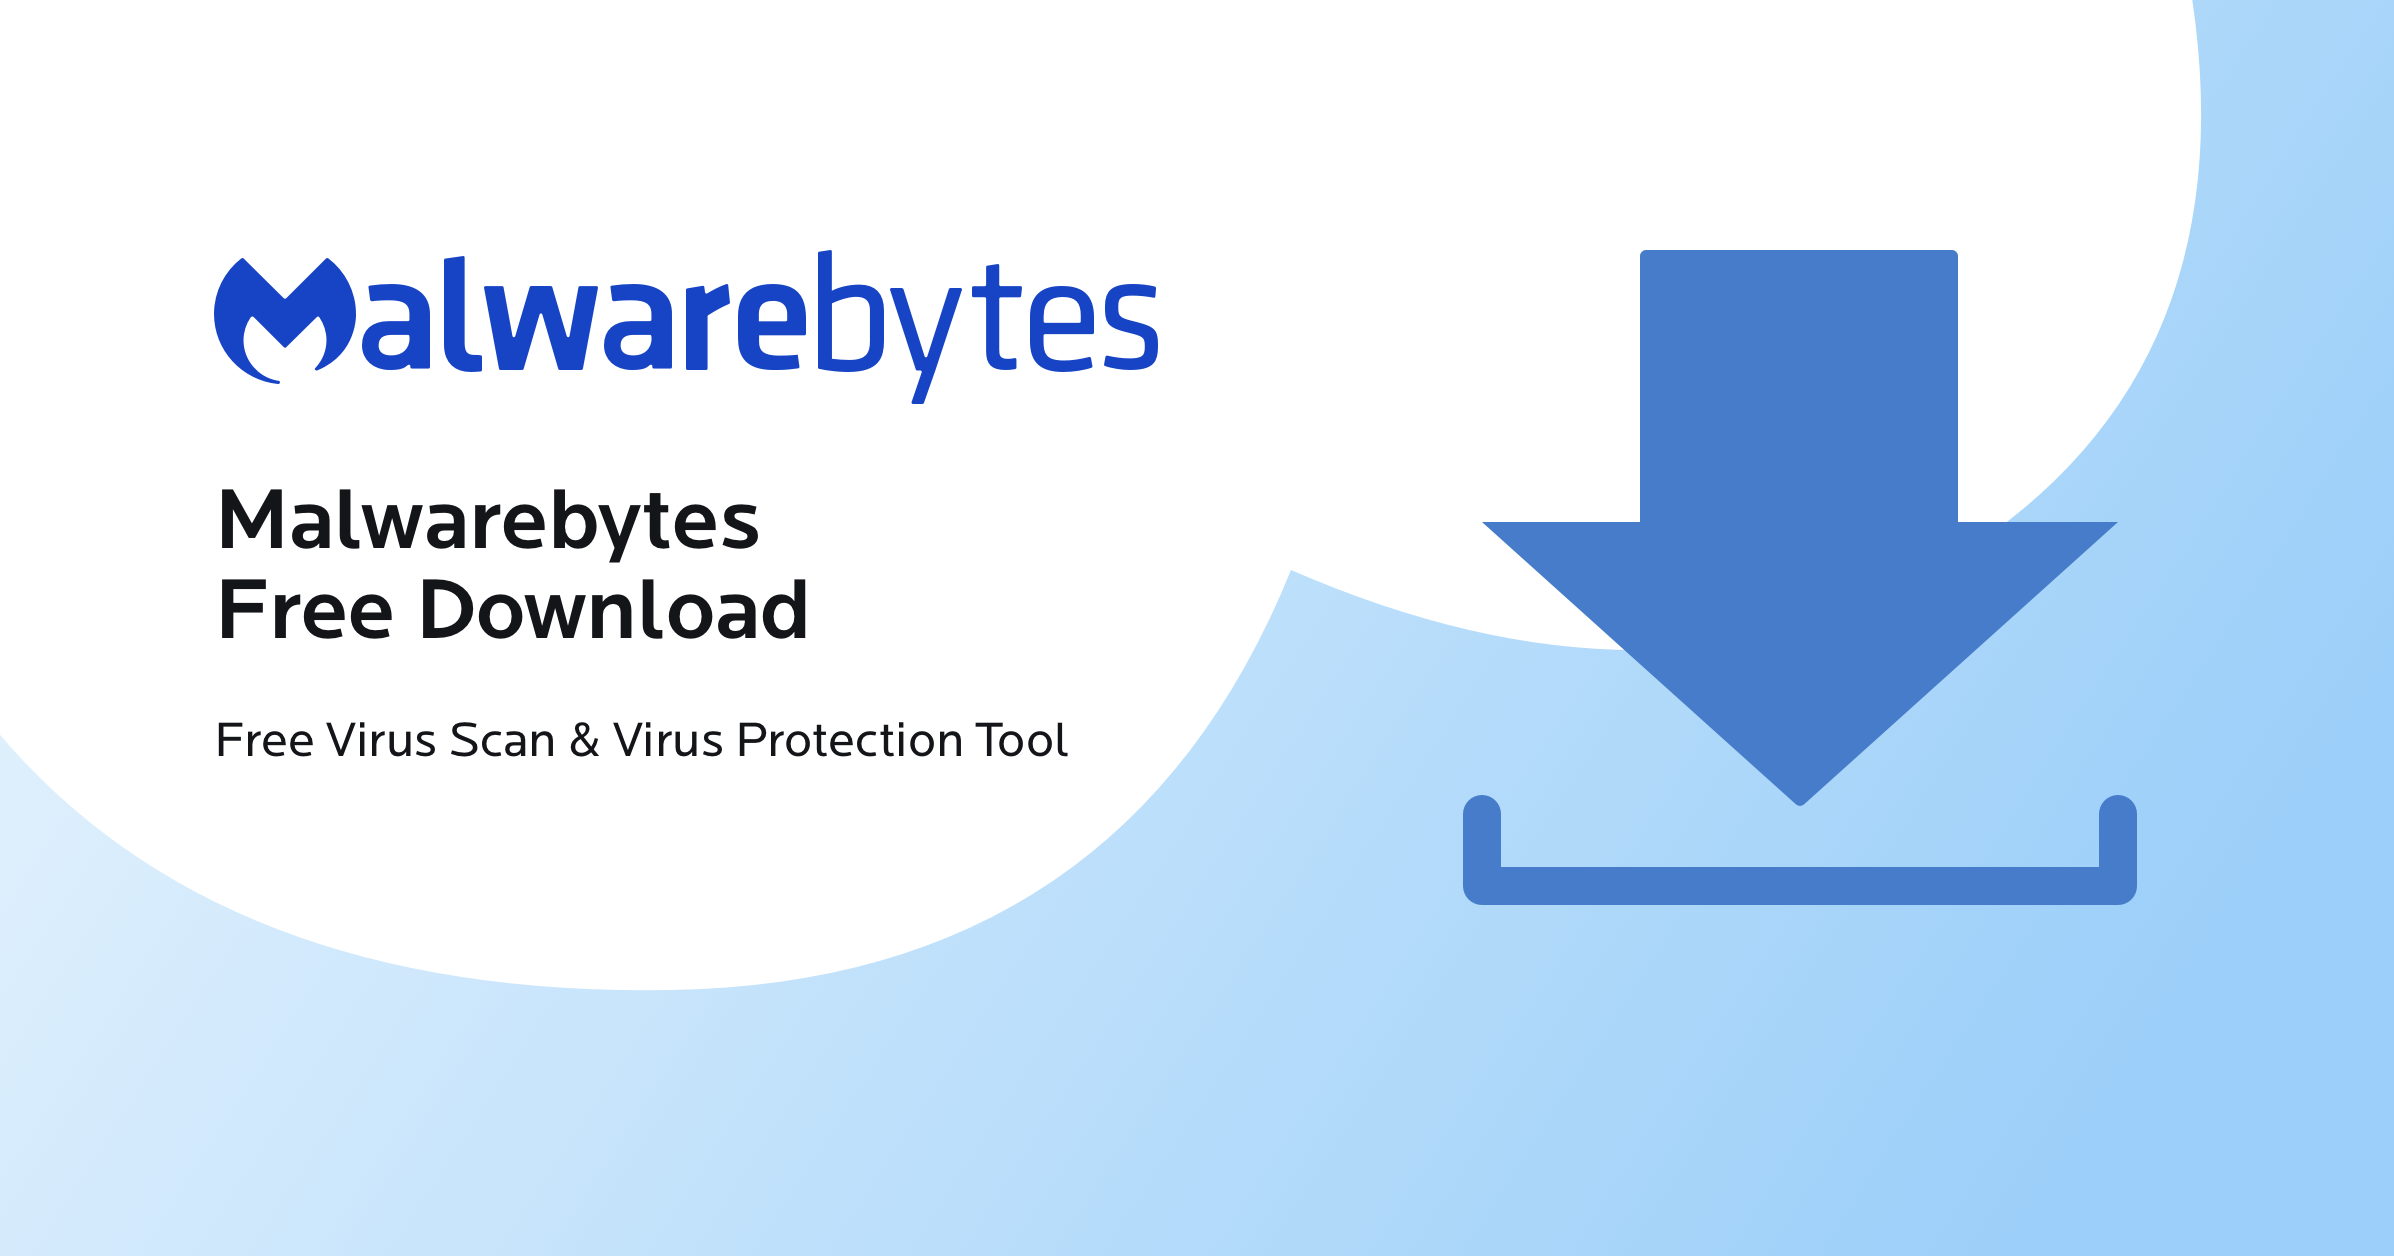 Download and install a reputable anti-malware program
Run a full system scan to detect and remove any malware present on your computer